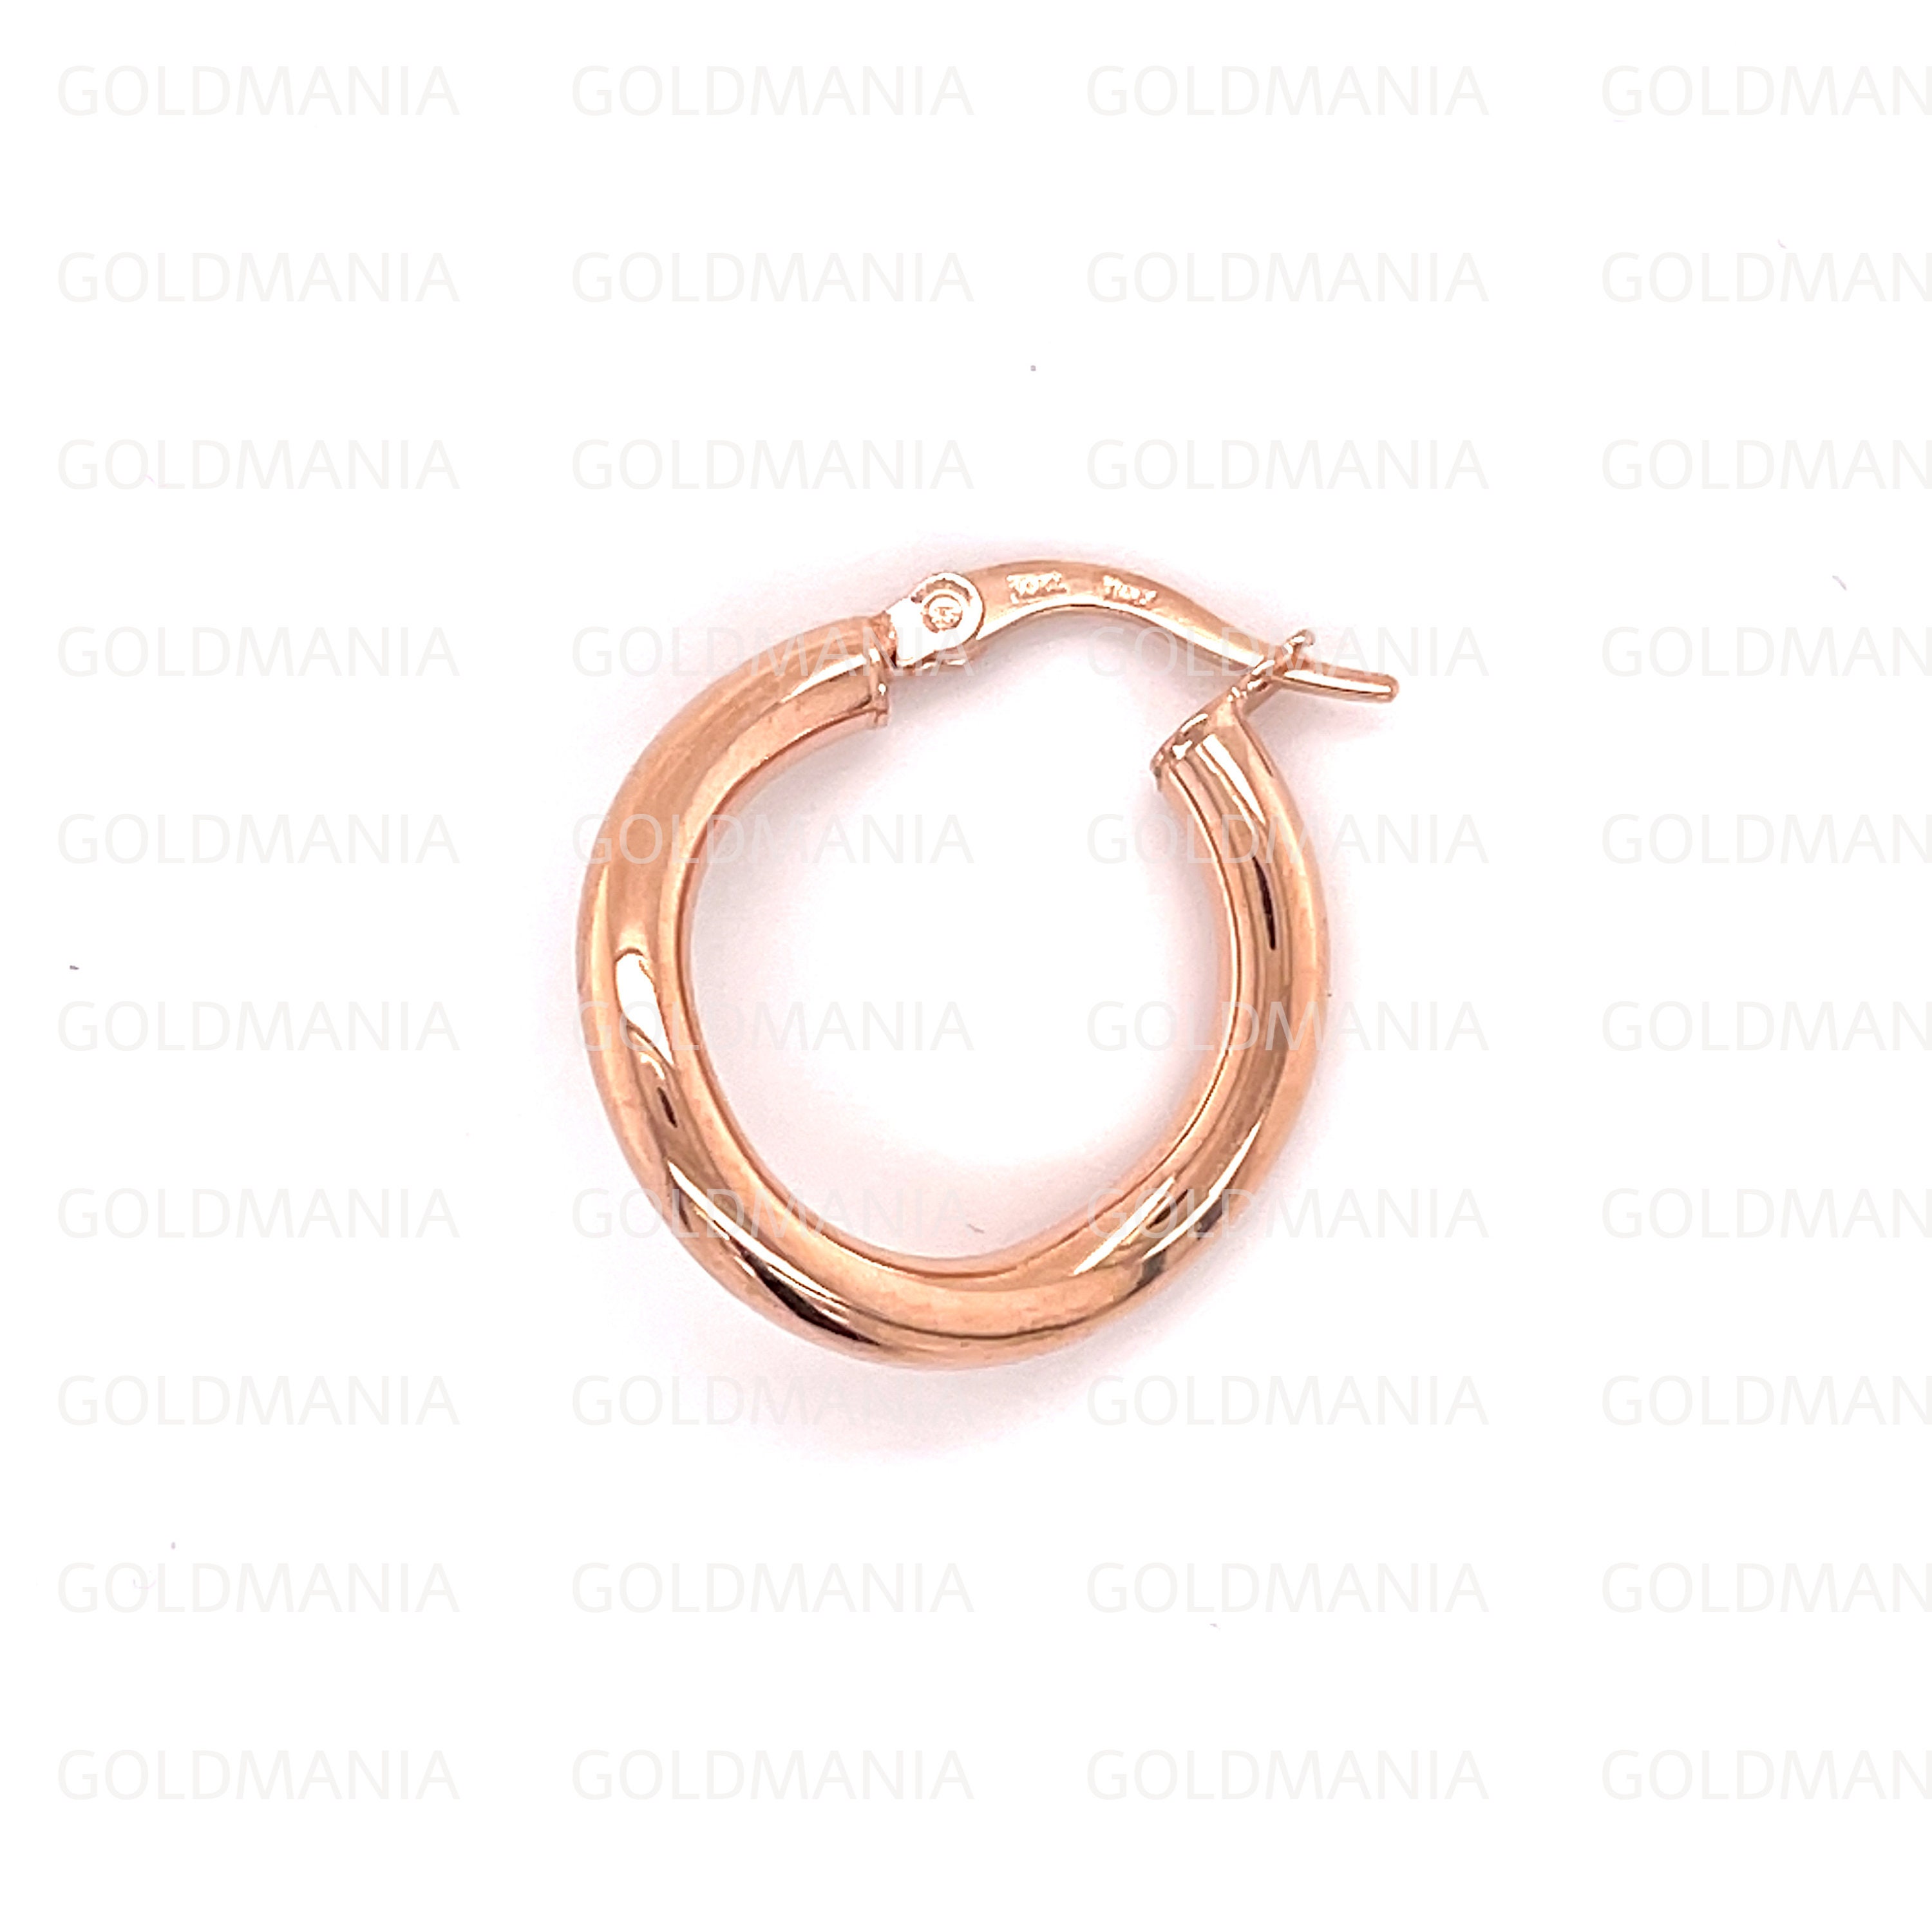 Best Quality Free Gift Box 14k Tri-color Polished 2.5mm Twisted Hoop Earrings 